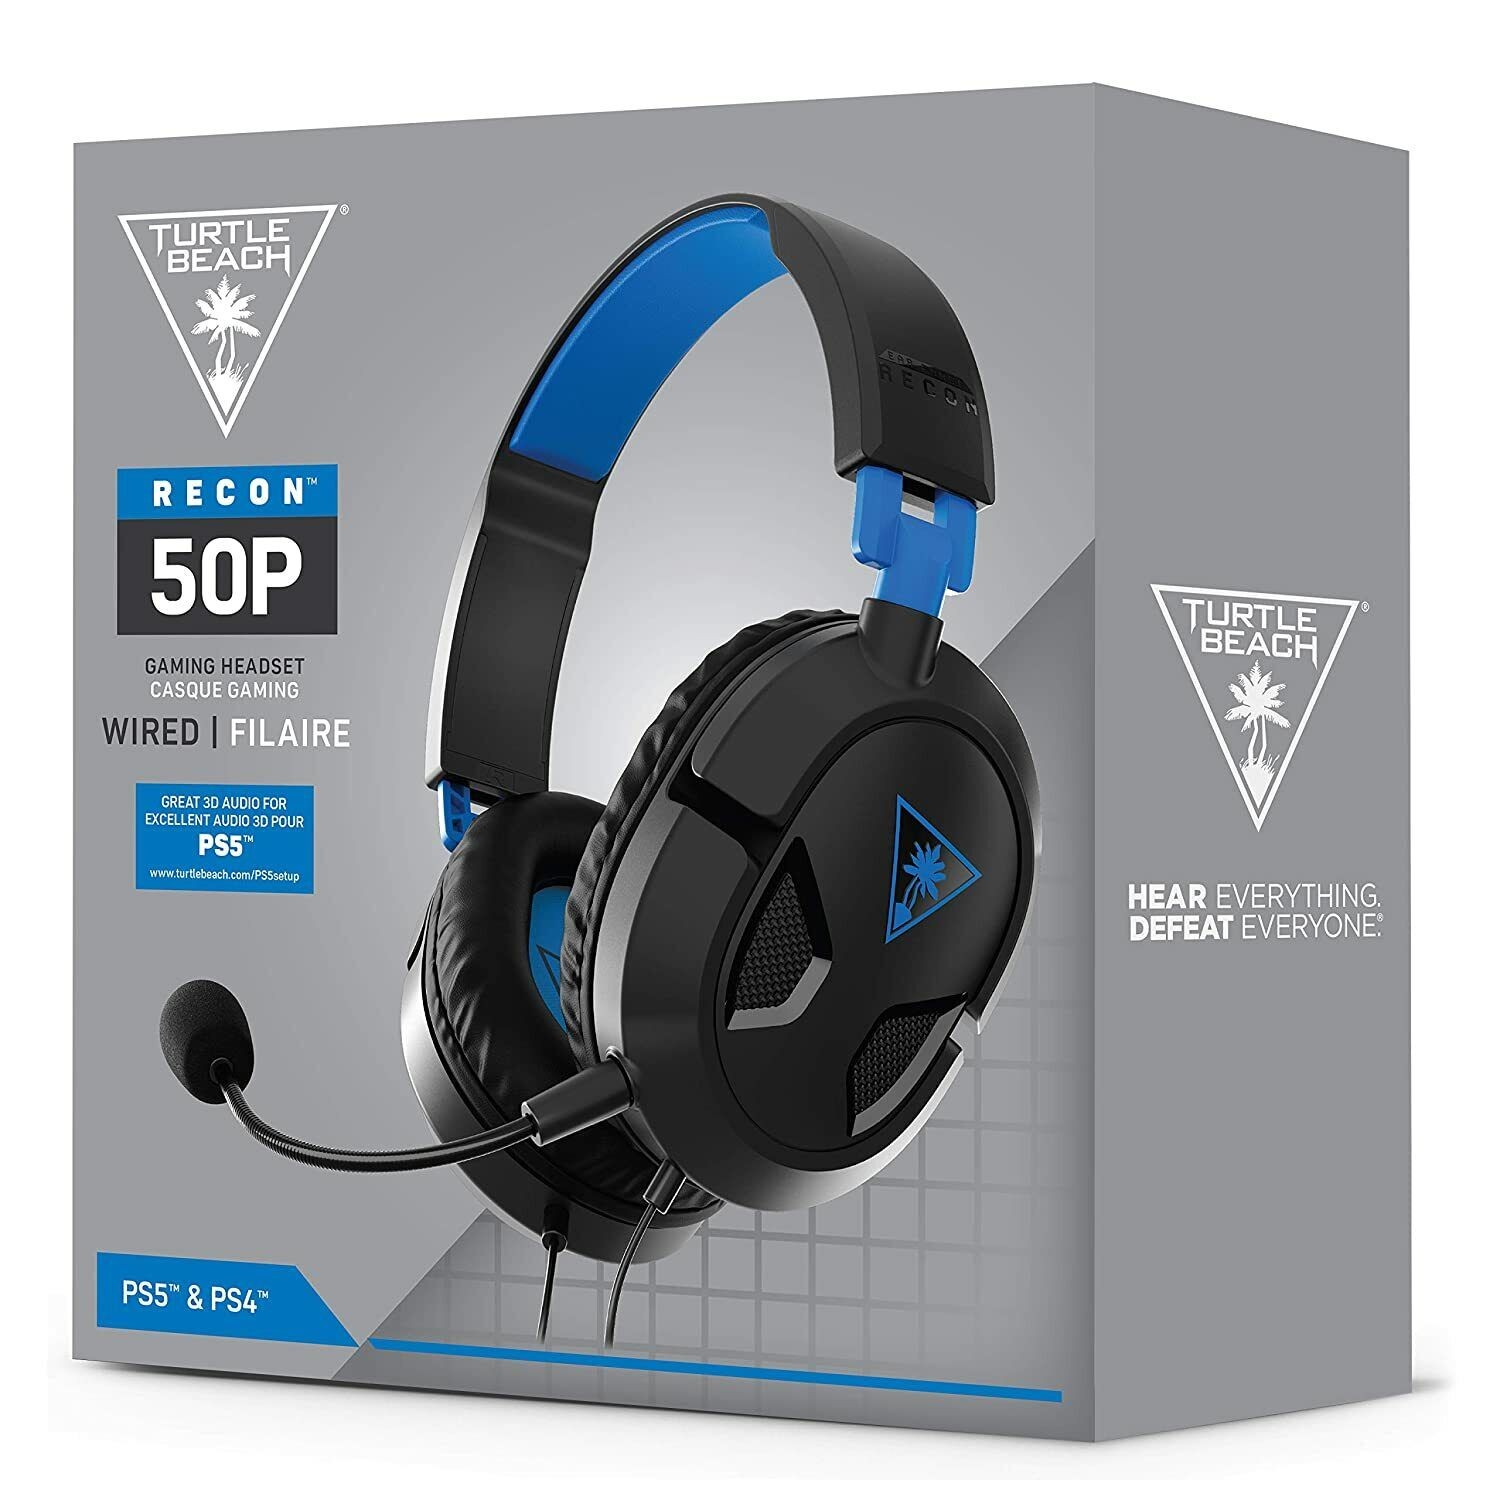 Turtle Beach PS5 & PS4 Gaming Headset Recon 50P